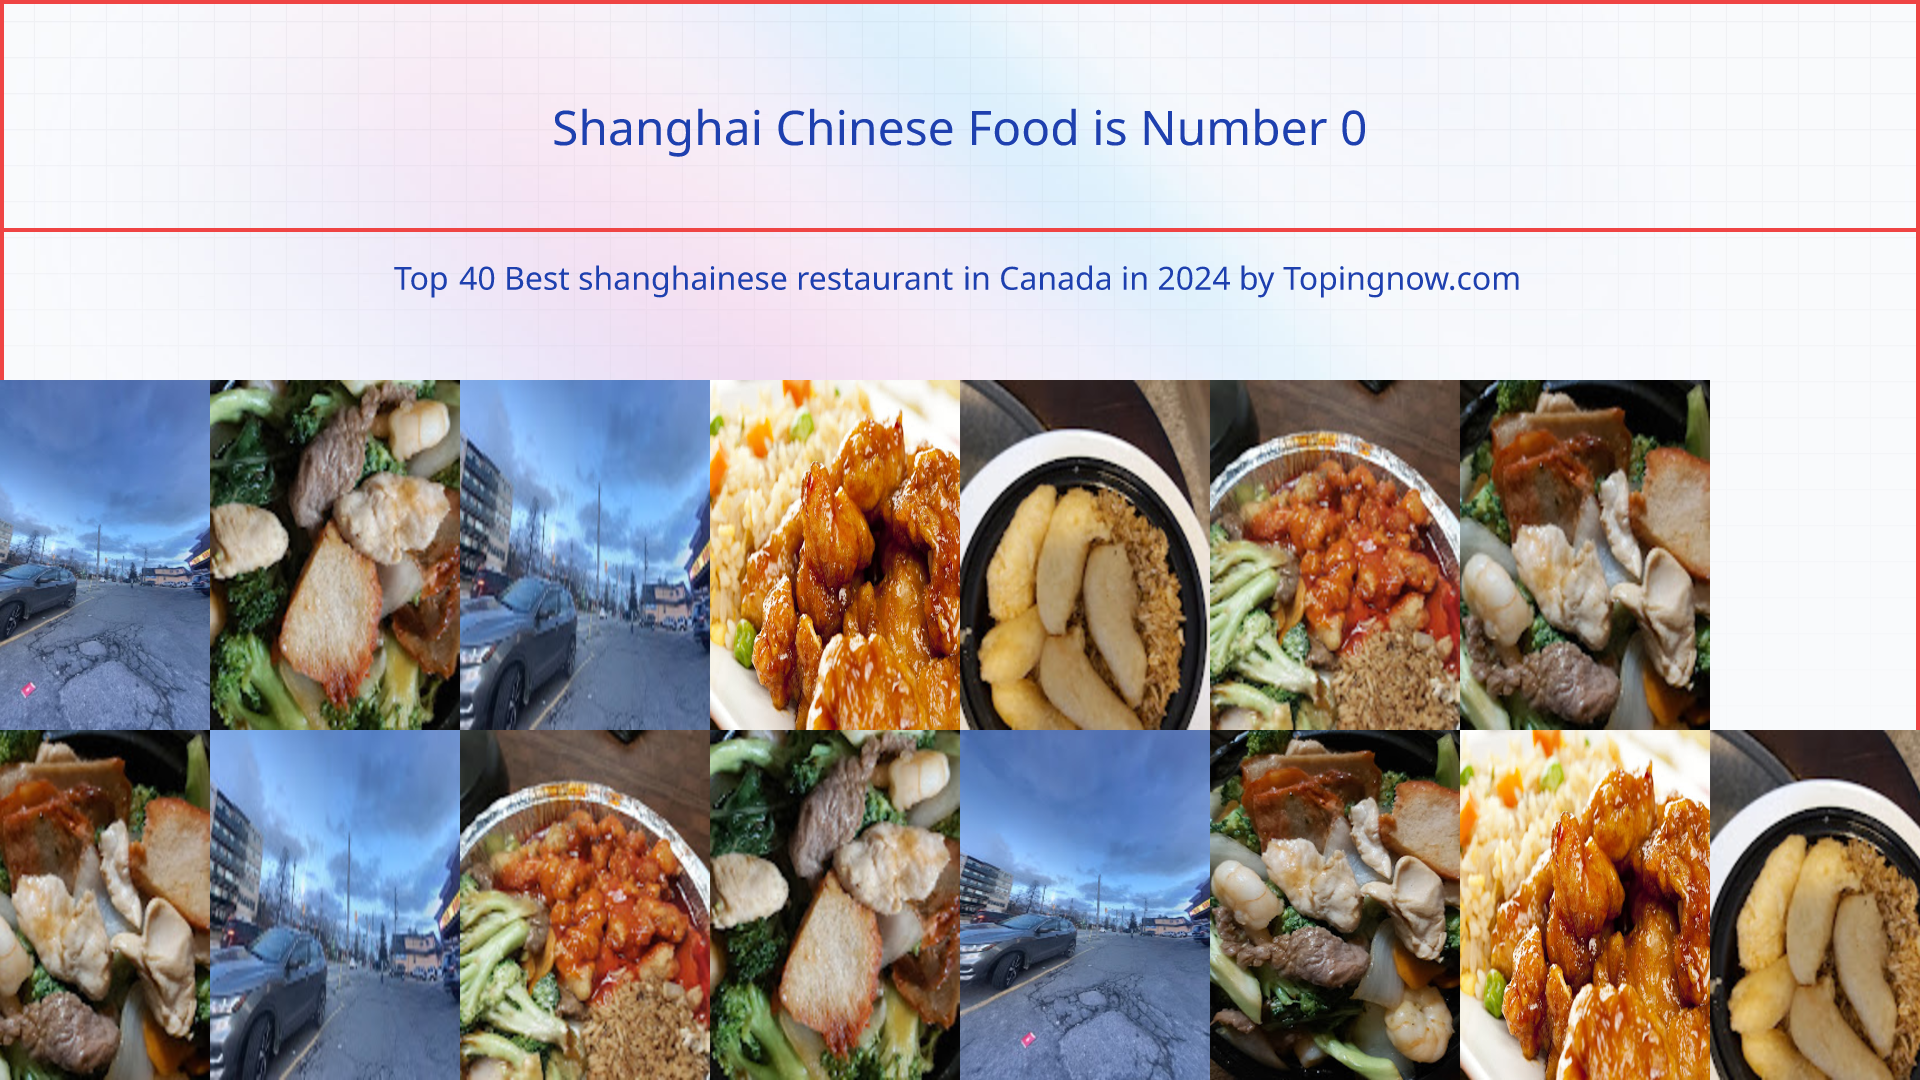 Shanghai Chinese Food: Top 40 Best shanghainese restaurant in Canada in 2024